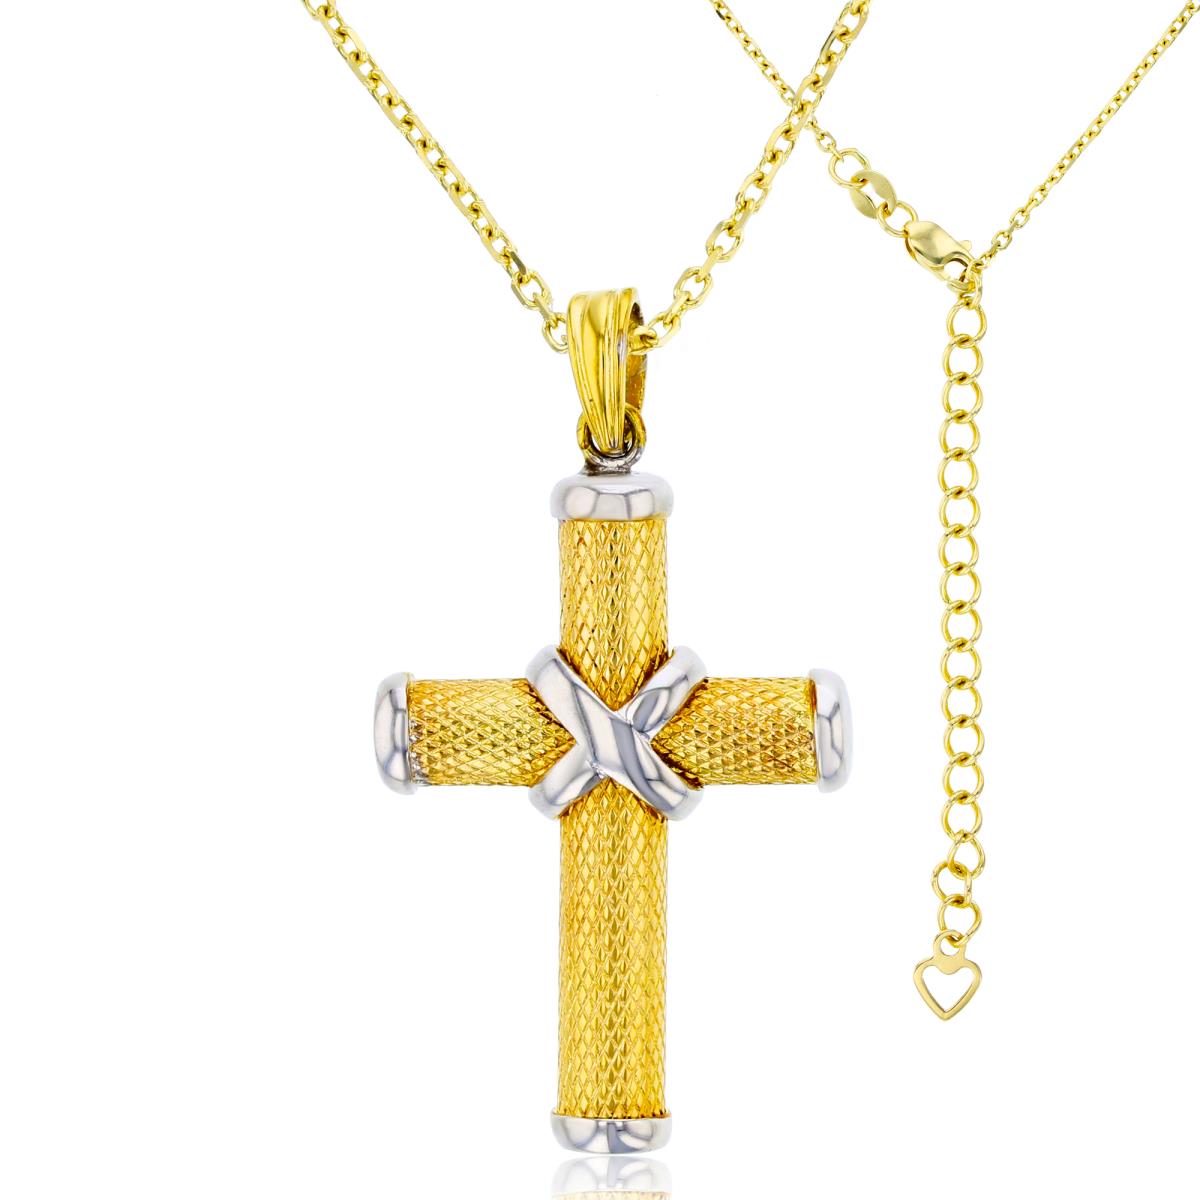 14K Two-Tone Gold Polished & Textured Knotted Cross 17"+2" Necklace